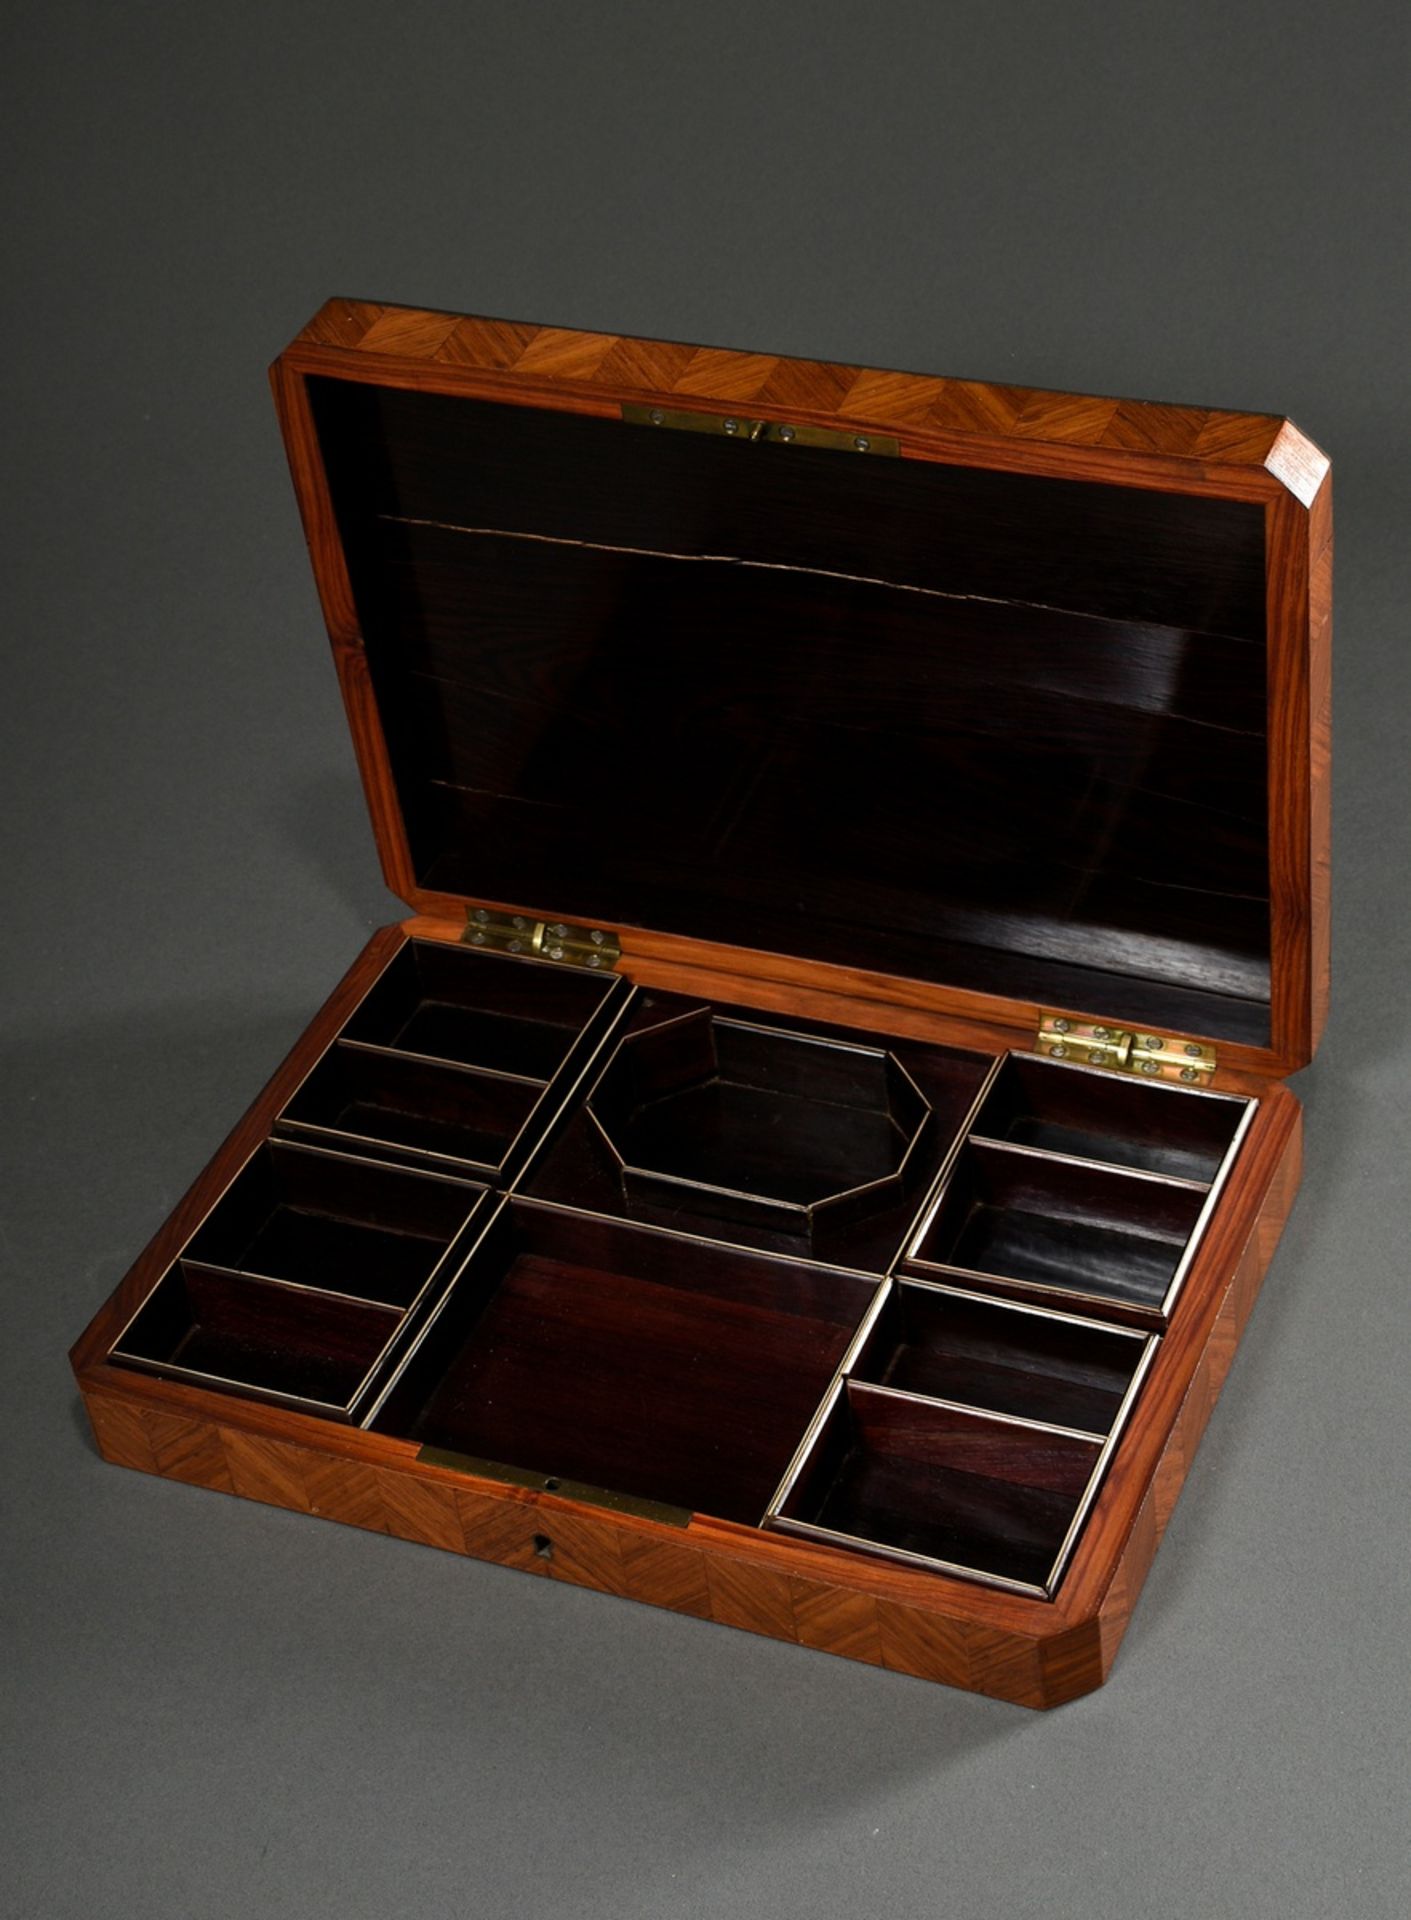 Flat box with bevelled corners and removable interior of 4 divided bowls, mahogany and rosewood ven - Image 4 of 4